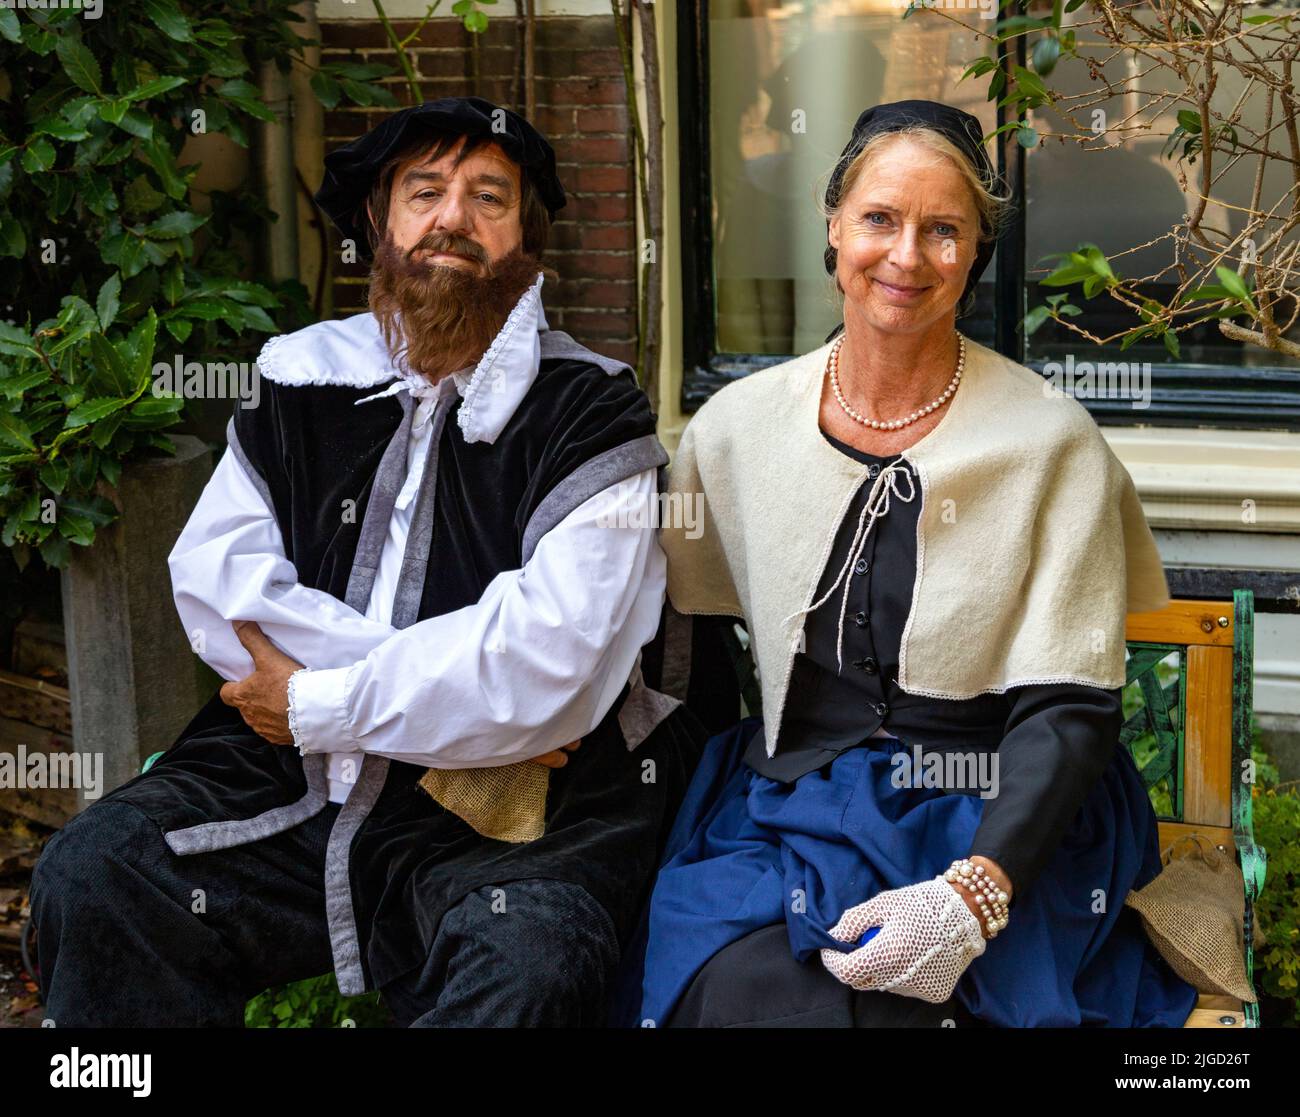 Reenactment festival of Rembrandt van Rijn, his paintings and era, Leiden, South Holland, Netherlands. Stock Photo